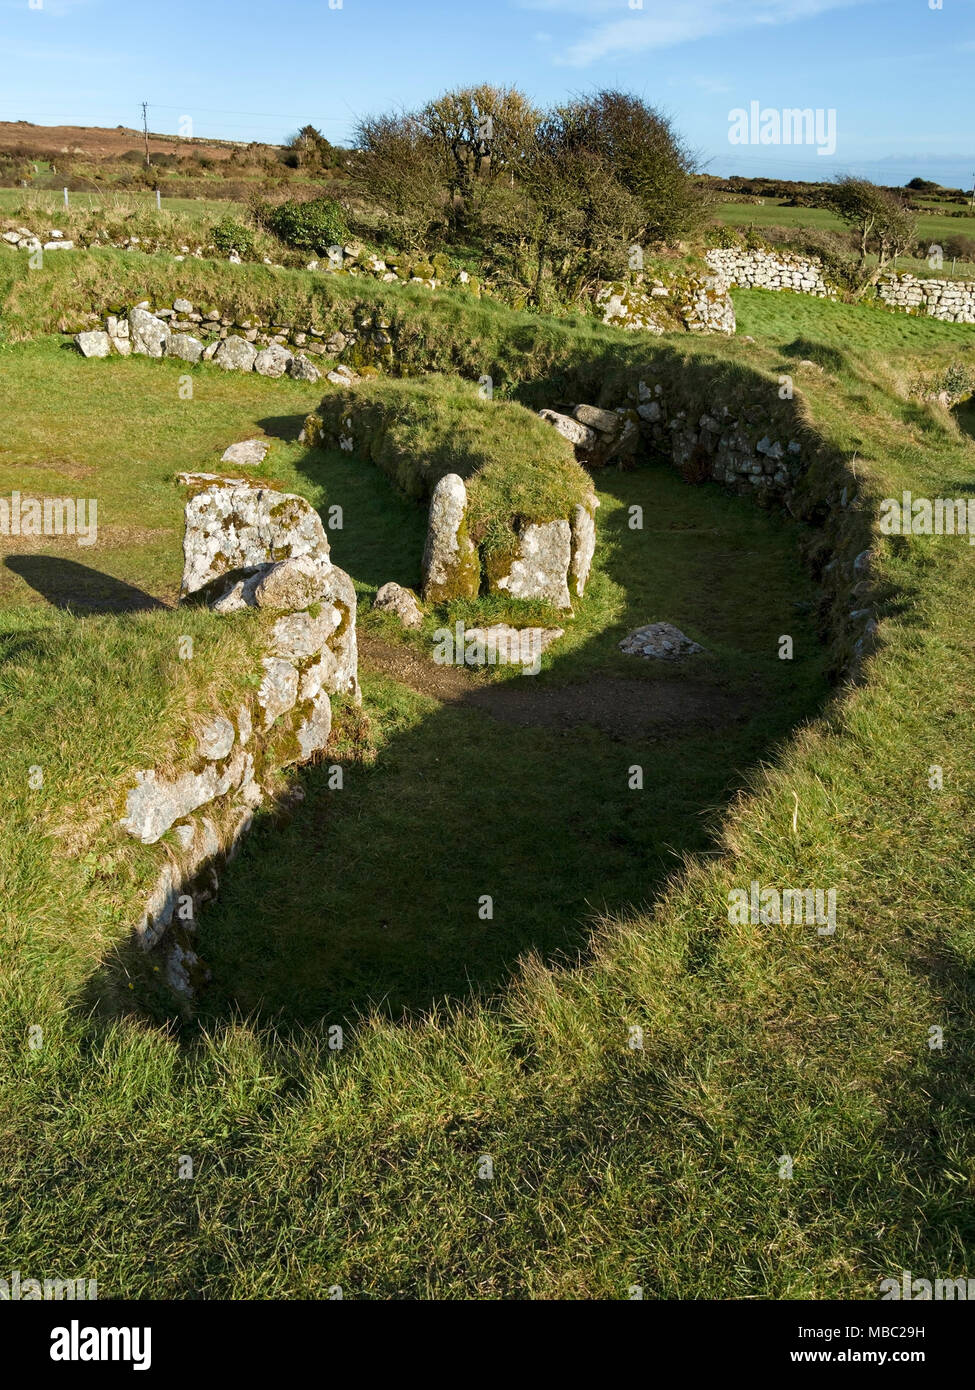 Remains of old courtyard house from Romano British period (AD 43-400), Carn Euny (Hendre Chapeluni) ancient village, Sancreed, Cornwall, England, UK Stock Photo